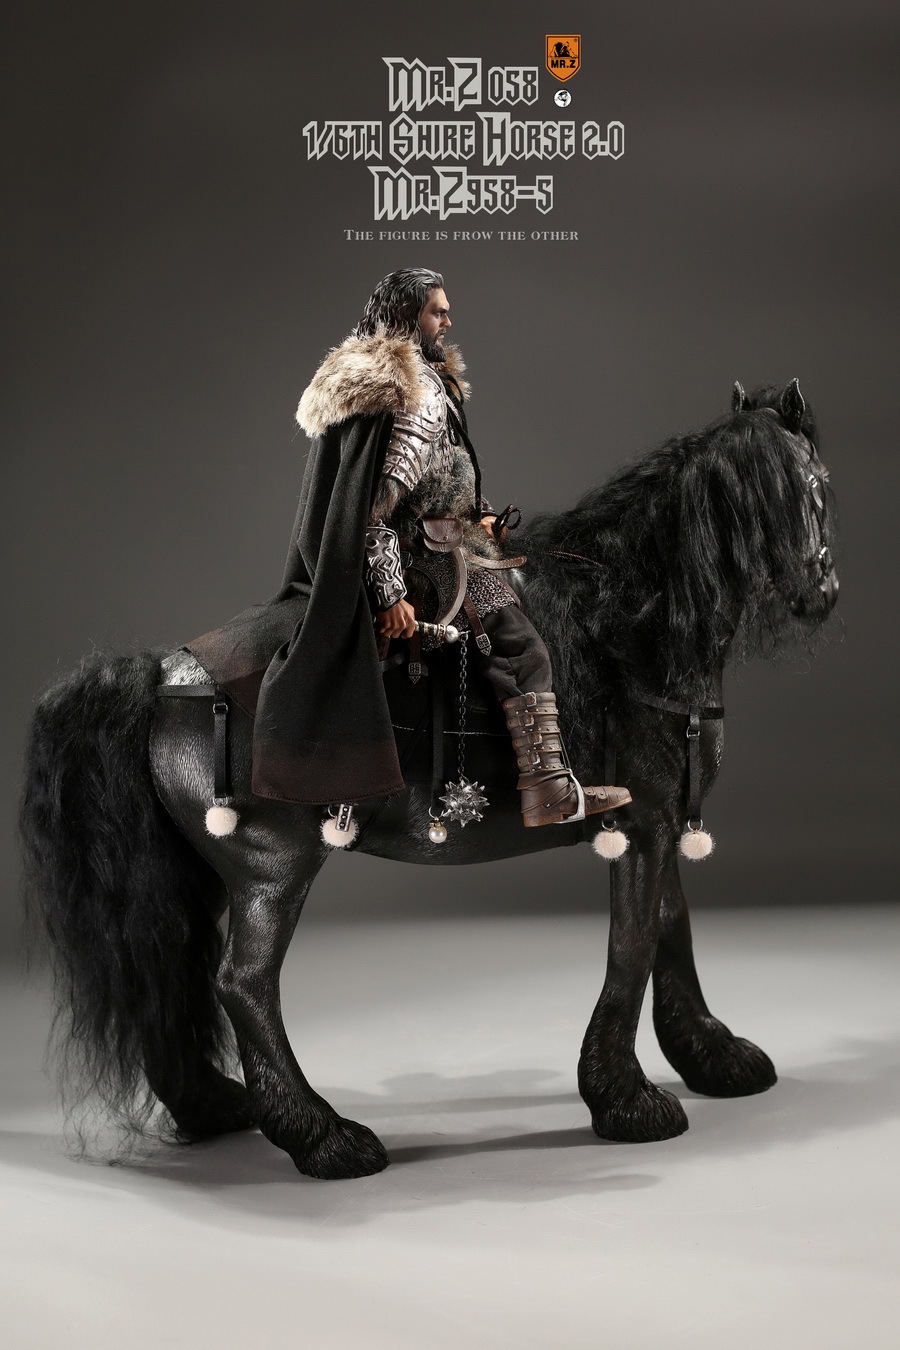 Mr - NEW PRODUCT: MR. Z: 58th round-Shire Horse 2.0 version full set of 5 colors  08575910